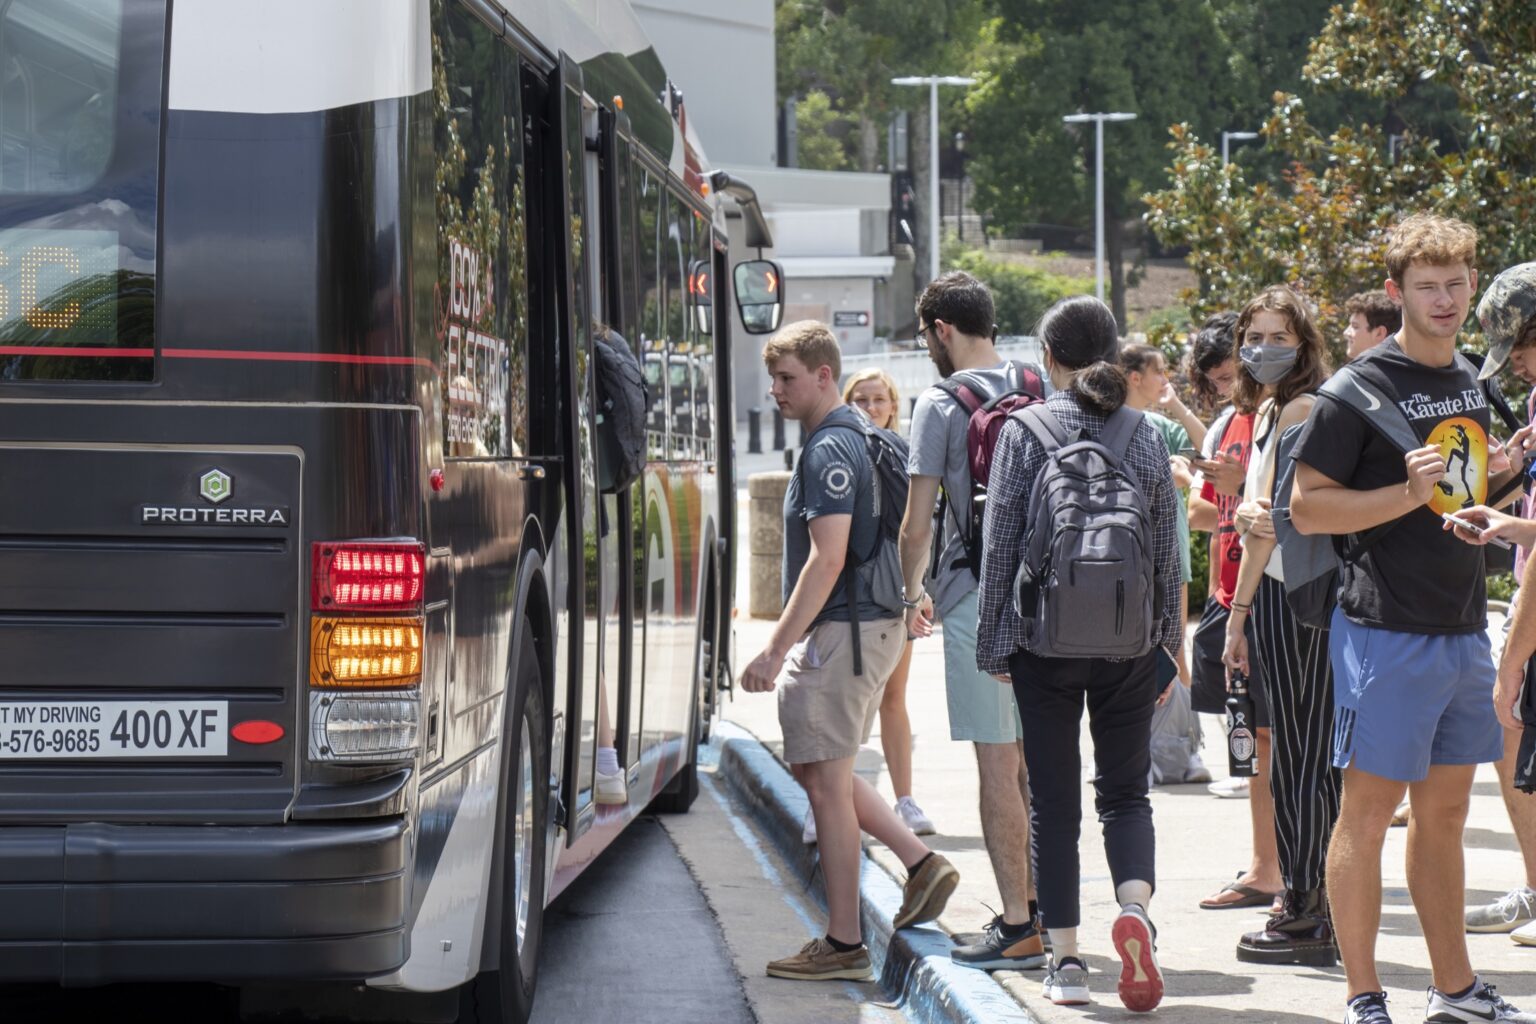 Students, some wearing face masks, board a bus at a university campus.